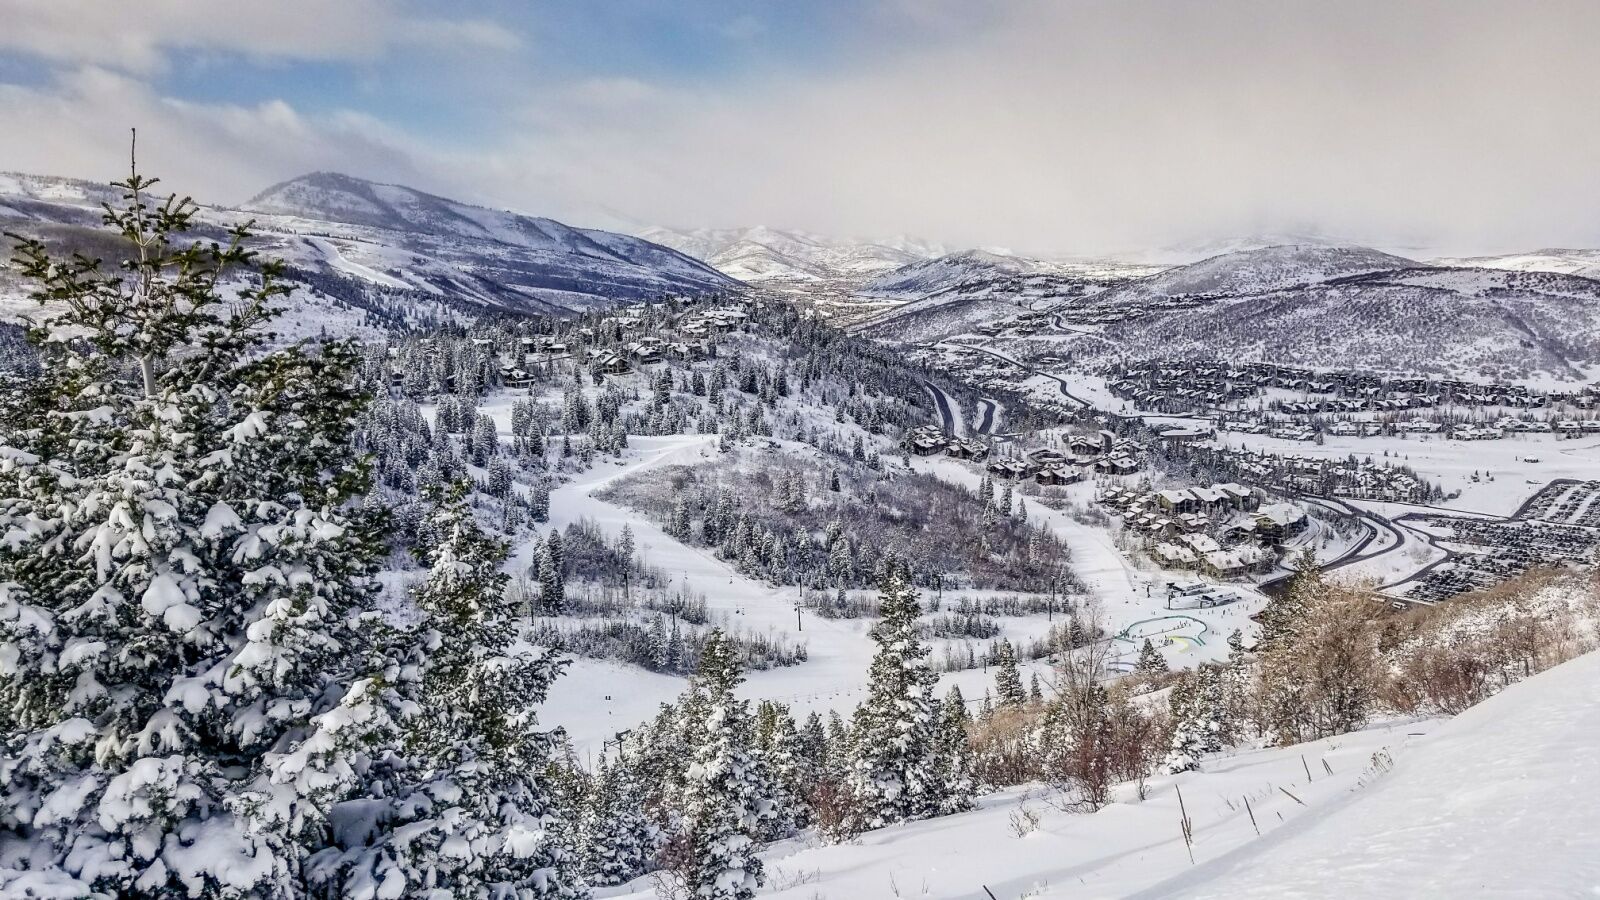 an overview of Deer Valley, one of many good nearby resorts for a weekend ski trip in salt lake city